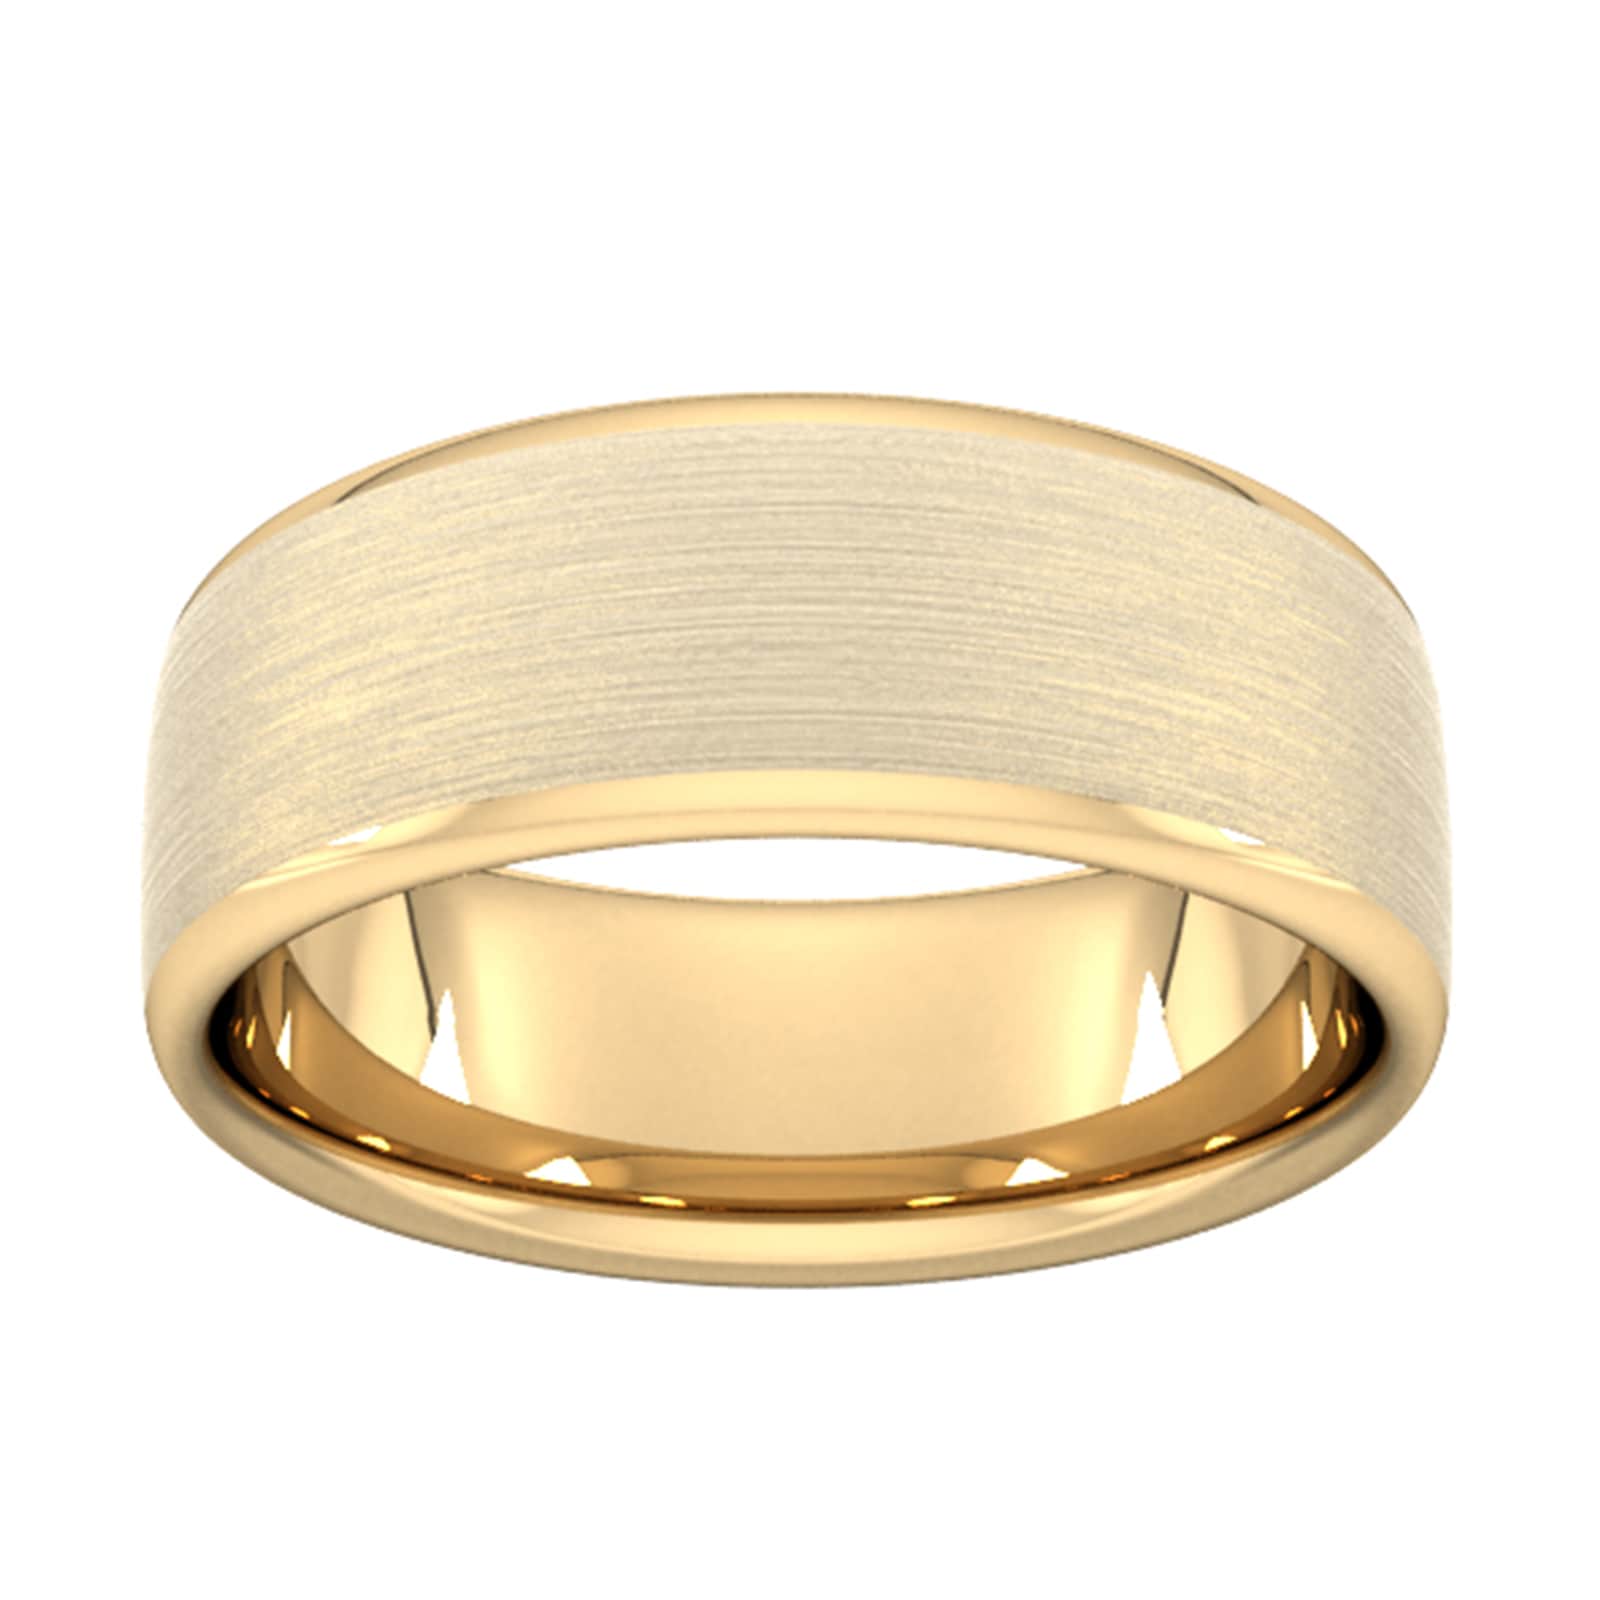 8mm Traditional Court Standard Matt Finished Wedding Ring In 9 Carat Yellow Gold - Ring Size T